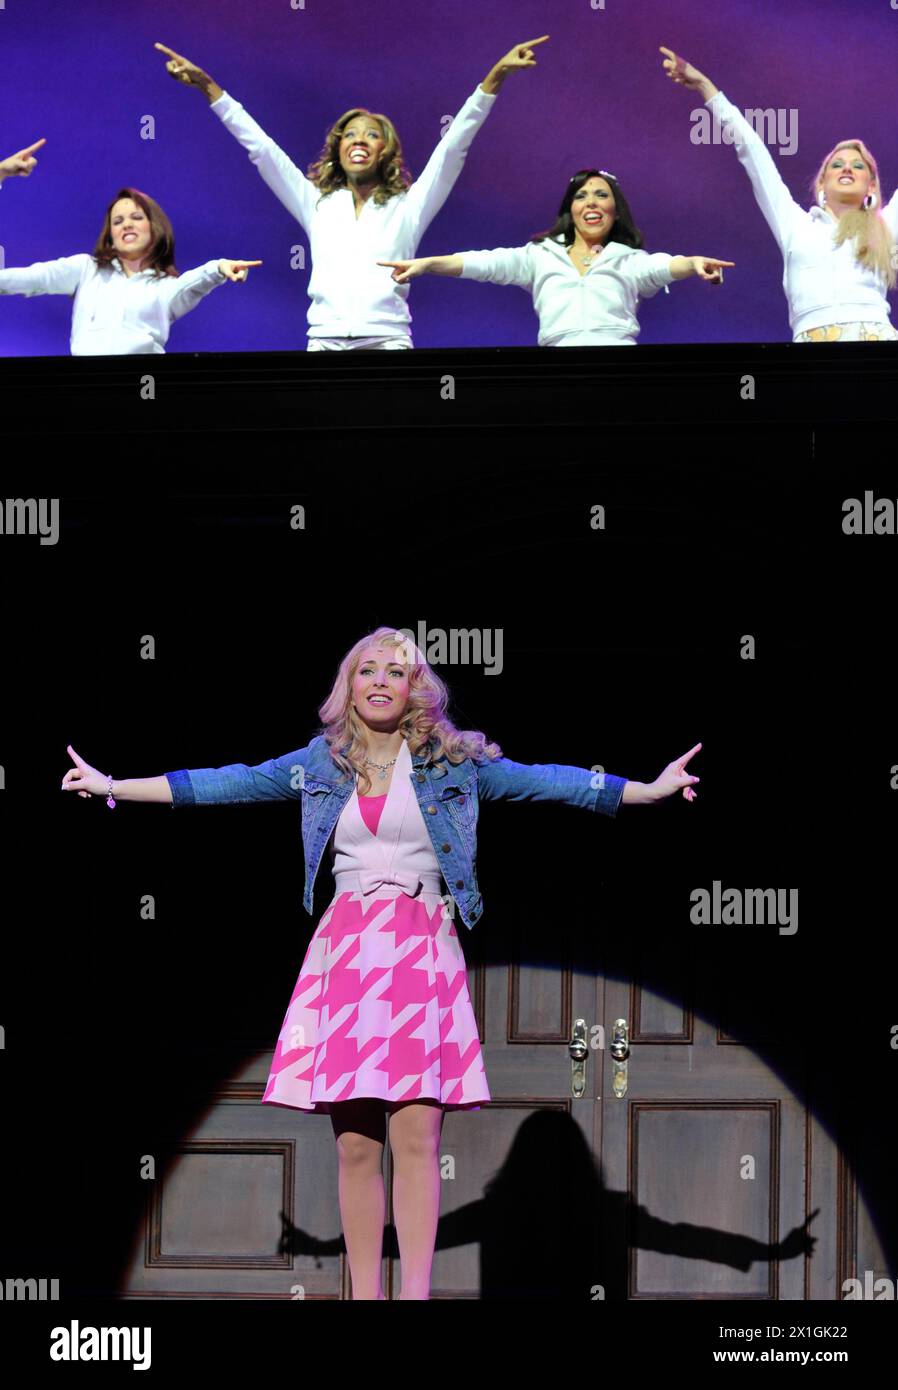 Vienna - 'Natürlich blond' (Legally  Blonde) rehearsals at Theater Ronacher on 13th February 2013. PICTURE: Barbara Obermeier as 'Elle Woods' - 20130213 PD2227 - Rechteinfo: Rights Managed (RM) Stock Photo